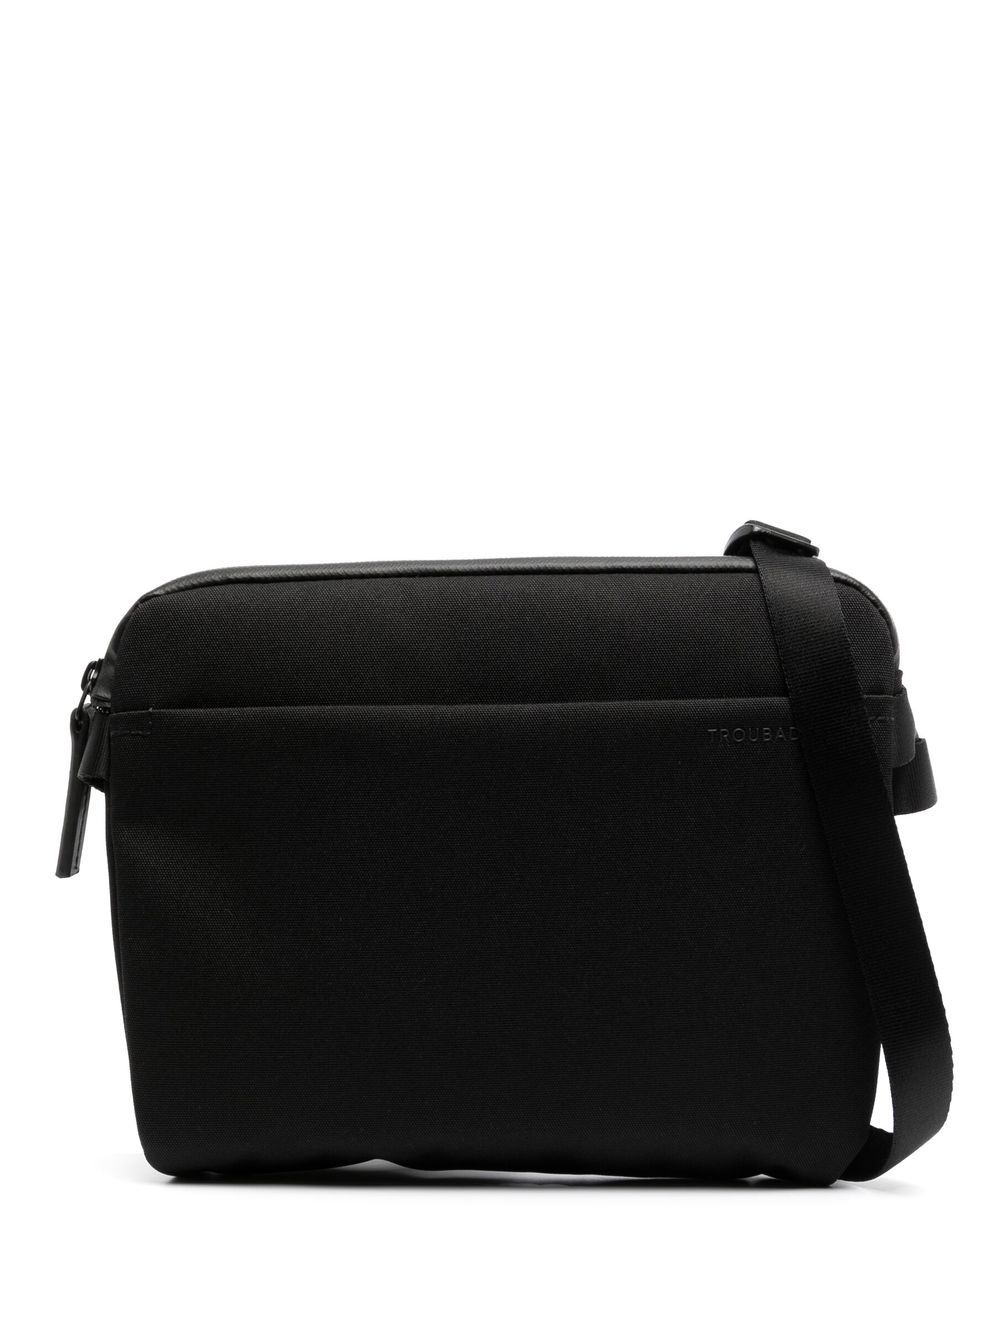 Image 1 of Troubadour recycled polyester crossbody bag